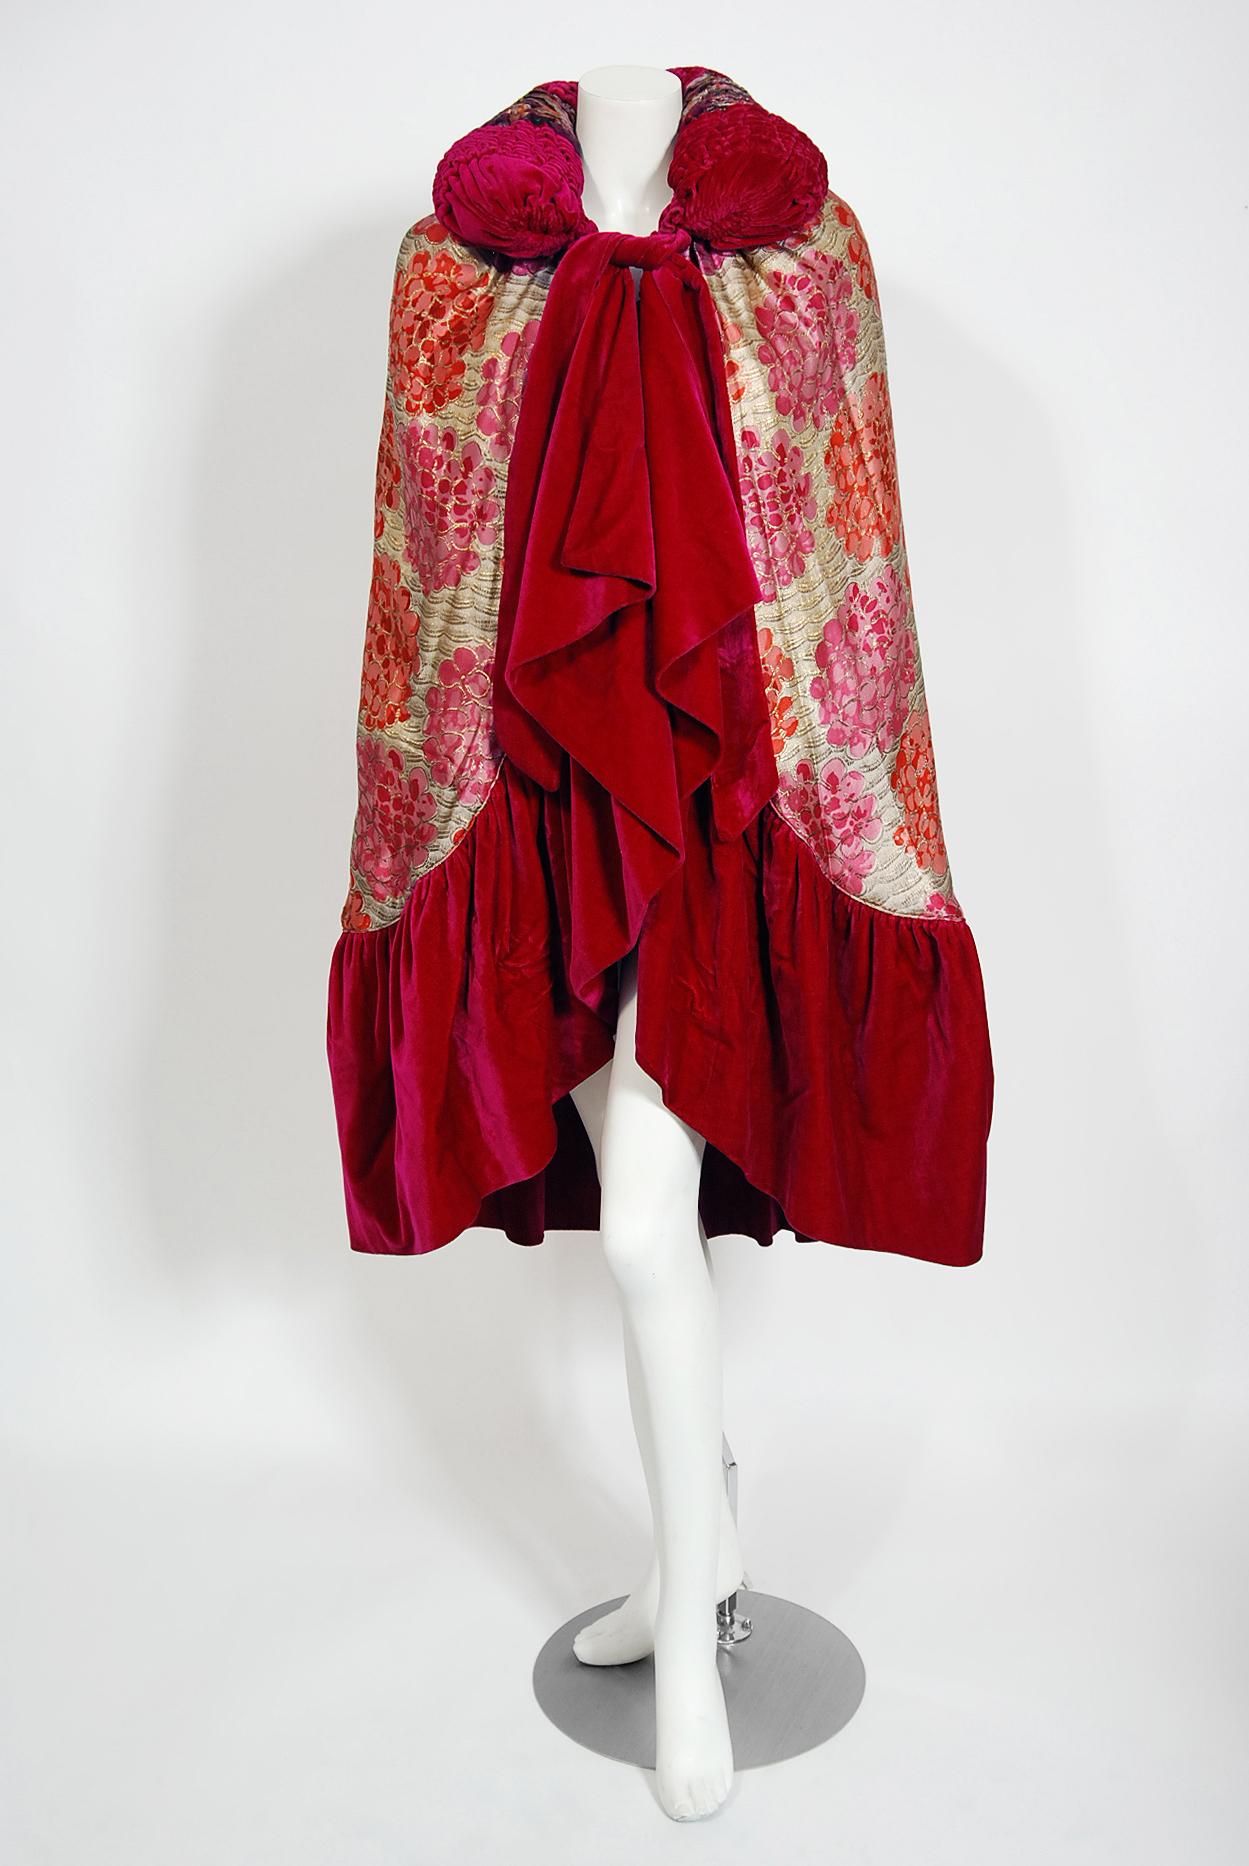 A gorgeous French metallic hydrangea floral print lamé & magenta silk-velvet evening cape dating back to the mid 1920's. Evening capes from the art-deco era remain a perennial favorite, perhaps because no other period combined such opulence with